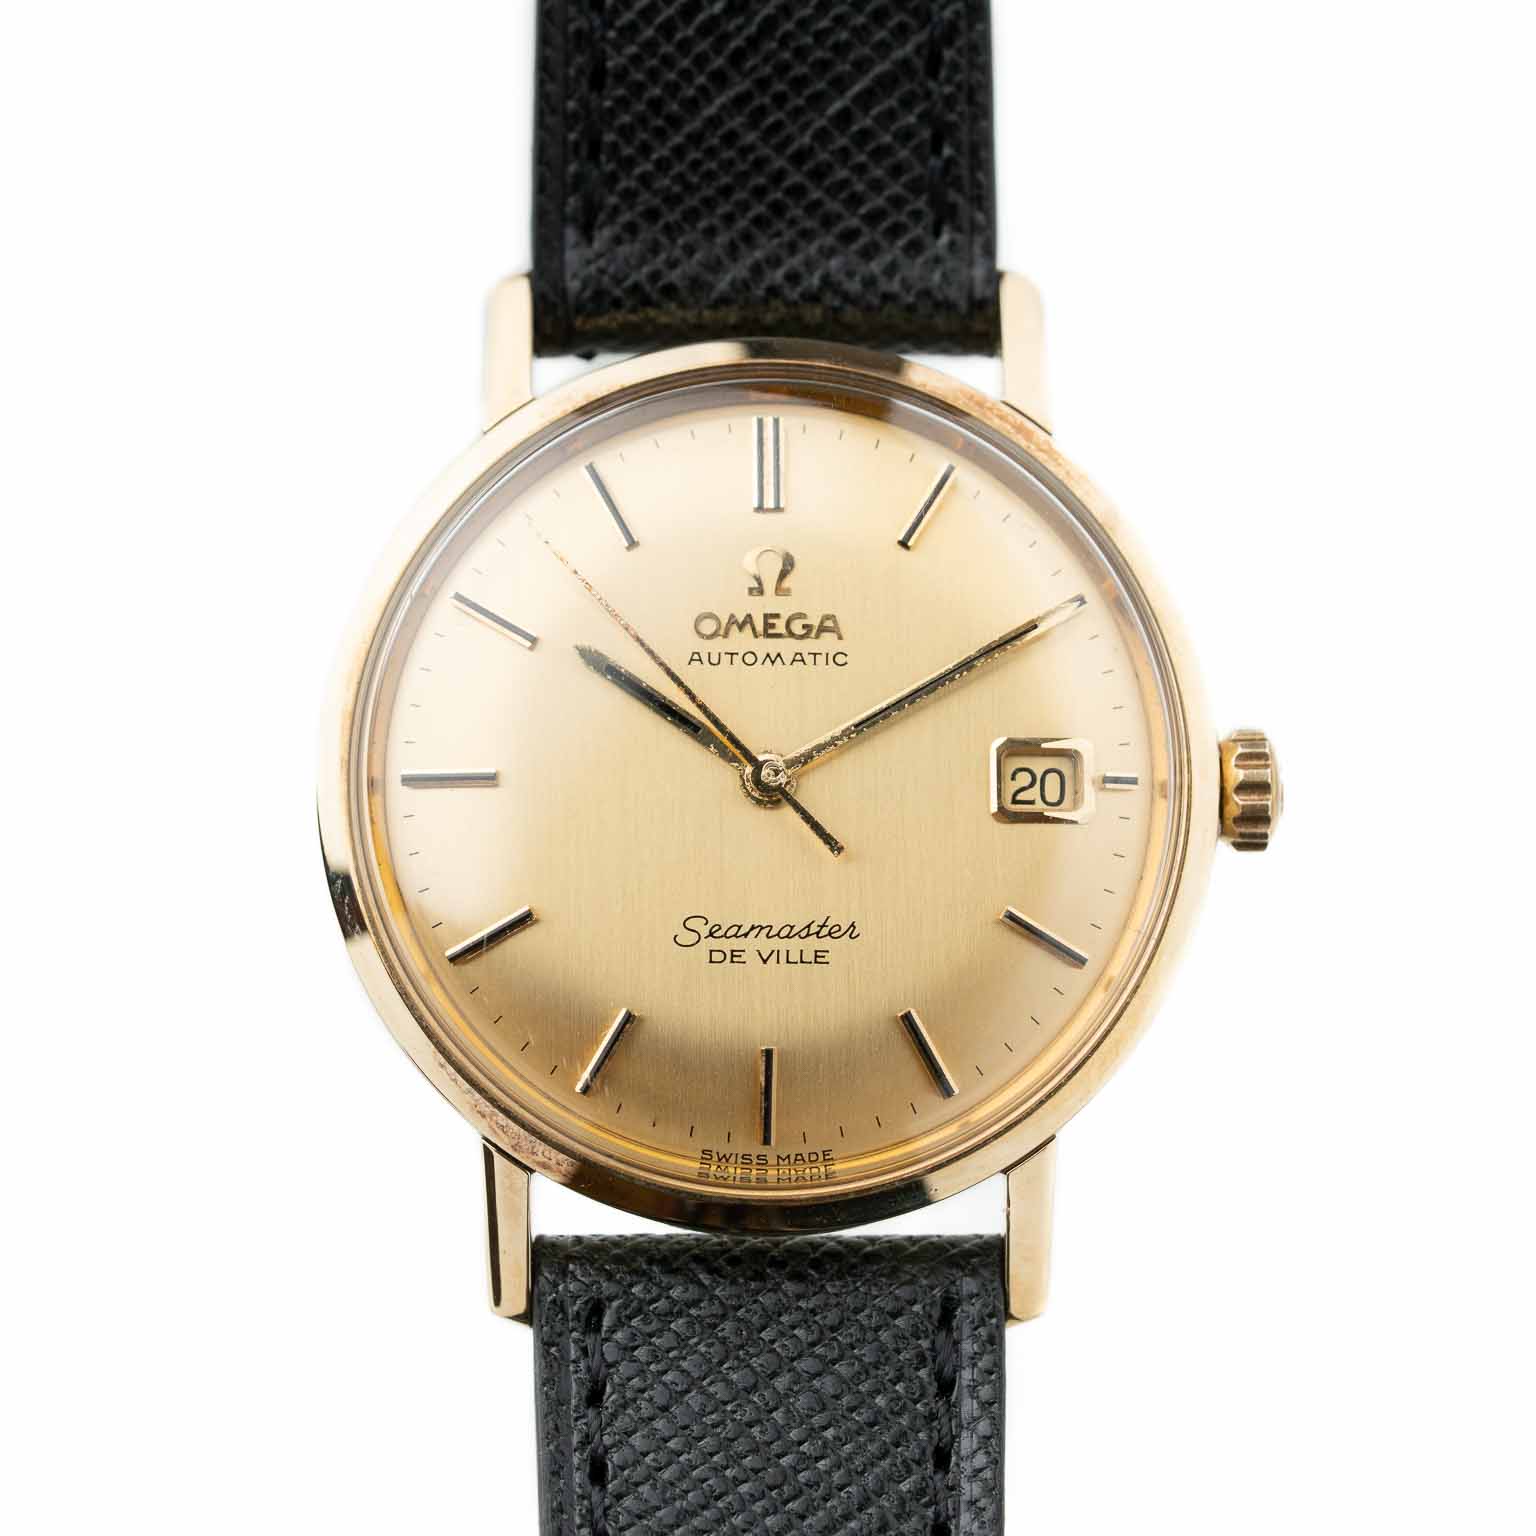 Vintage Omega Seamaster de Ville Champagne dial 14k gold 166.020 from 1965 watch front